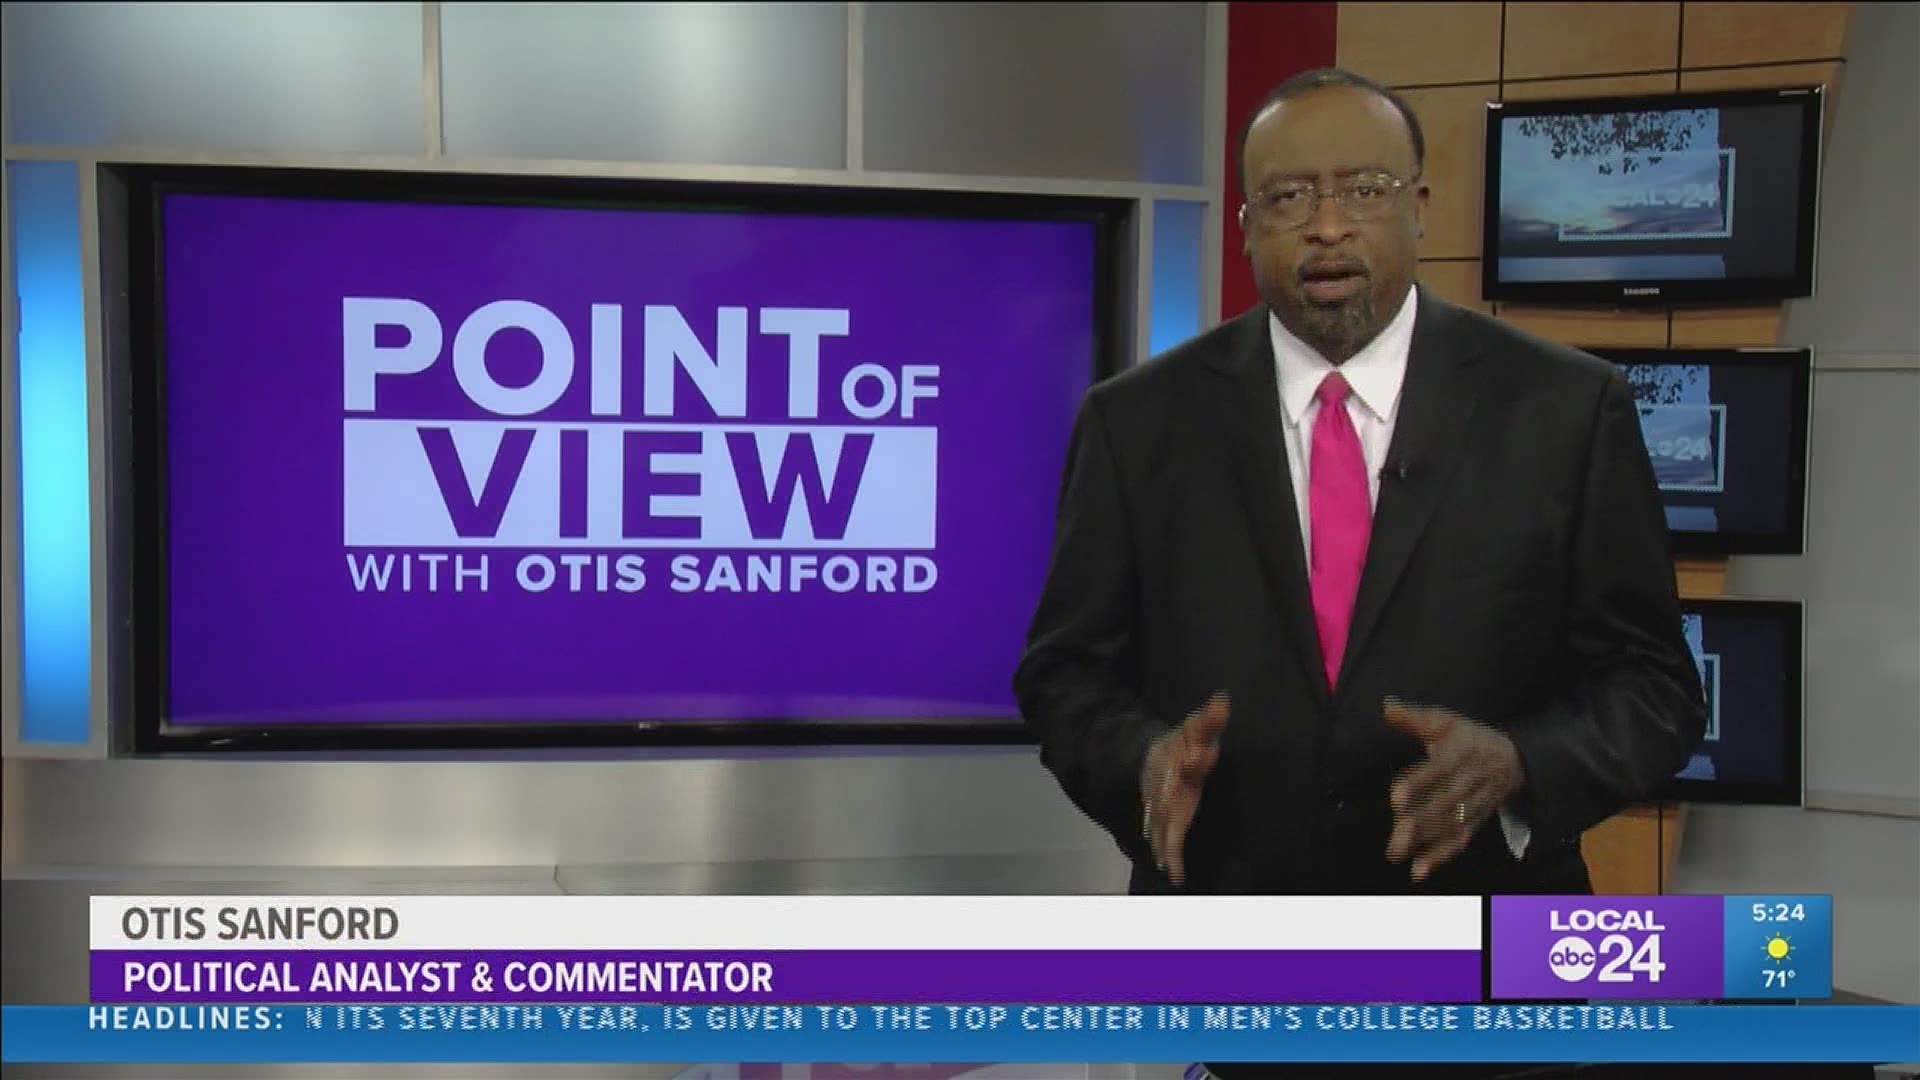 Local 24 News political analyst and commentator Otis Sanford shares his point of view on Gov. Tate Reeves’ stance early voting in Mississippi.